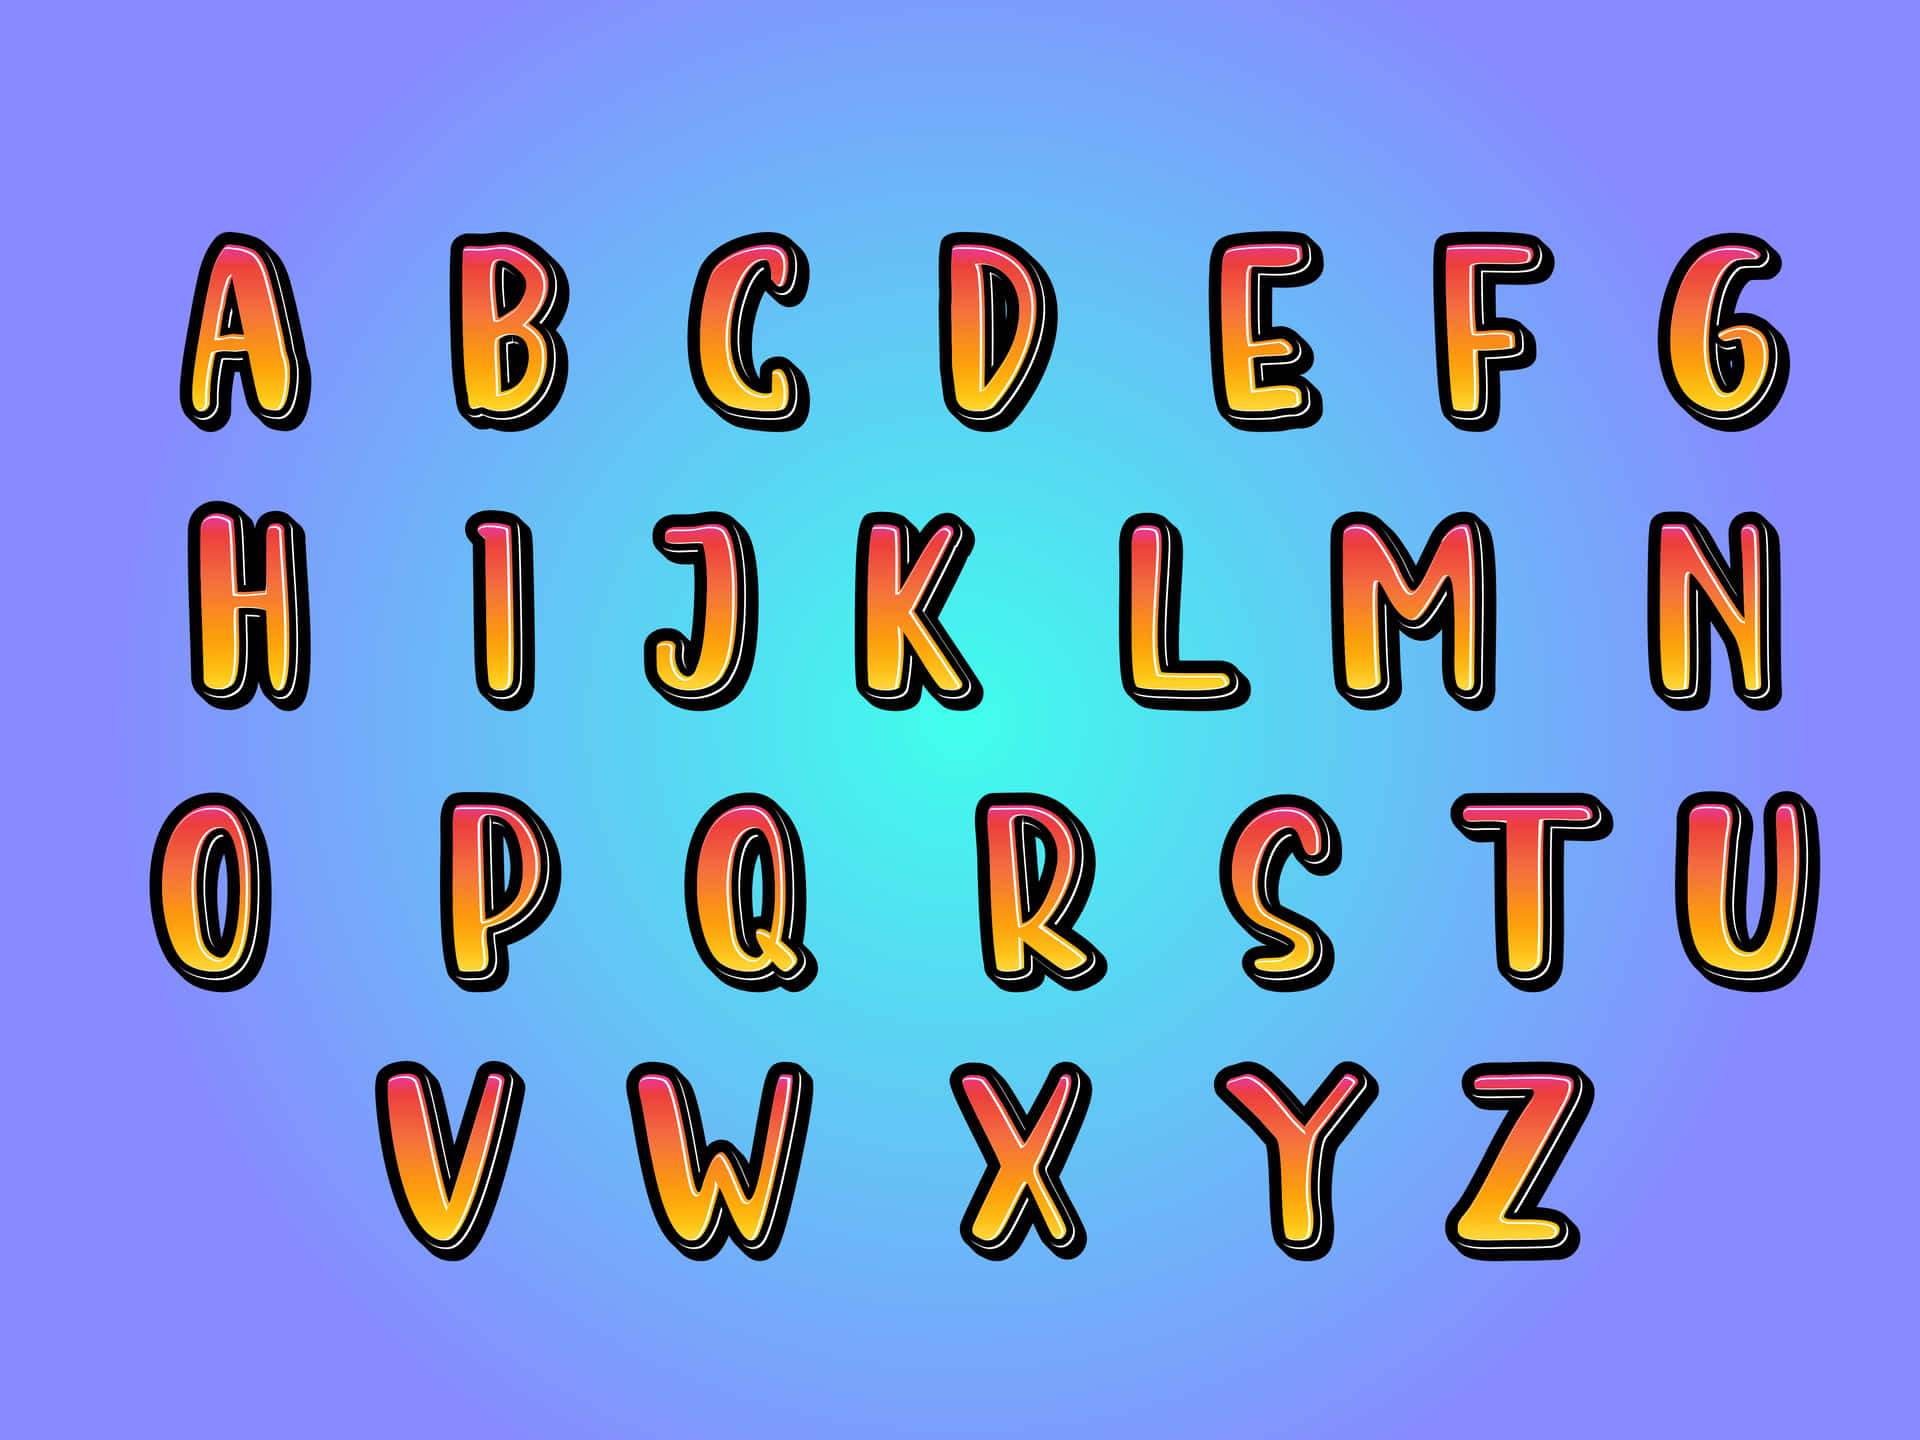 A Cartoon Alphabet With Colorful Letters